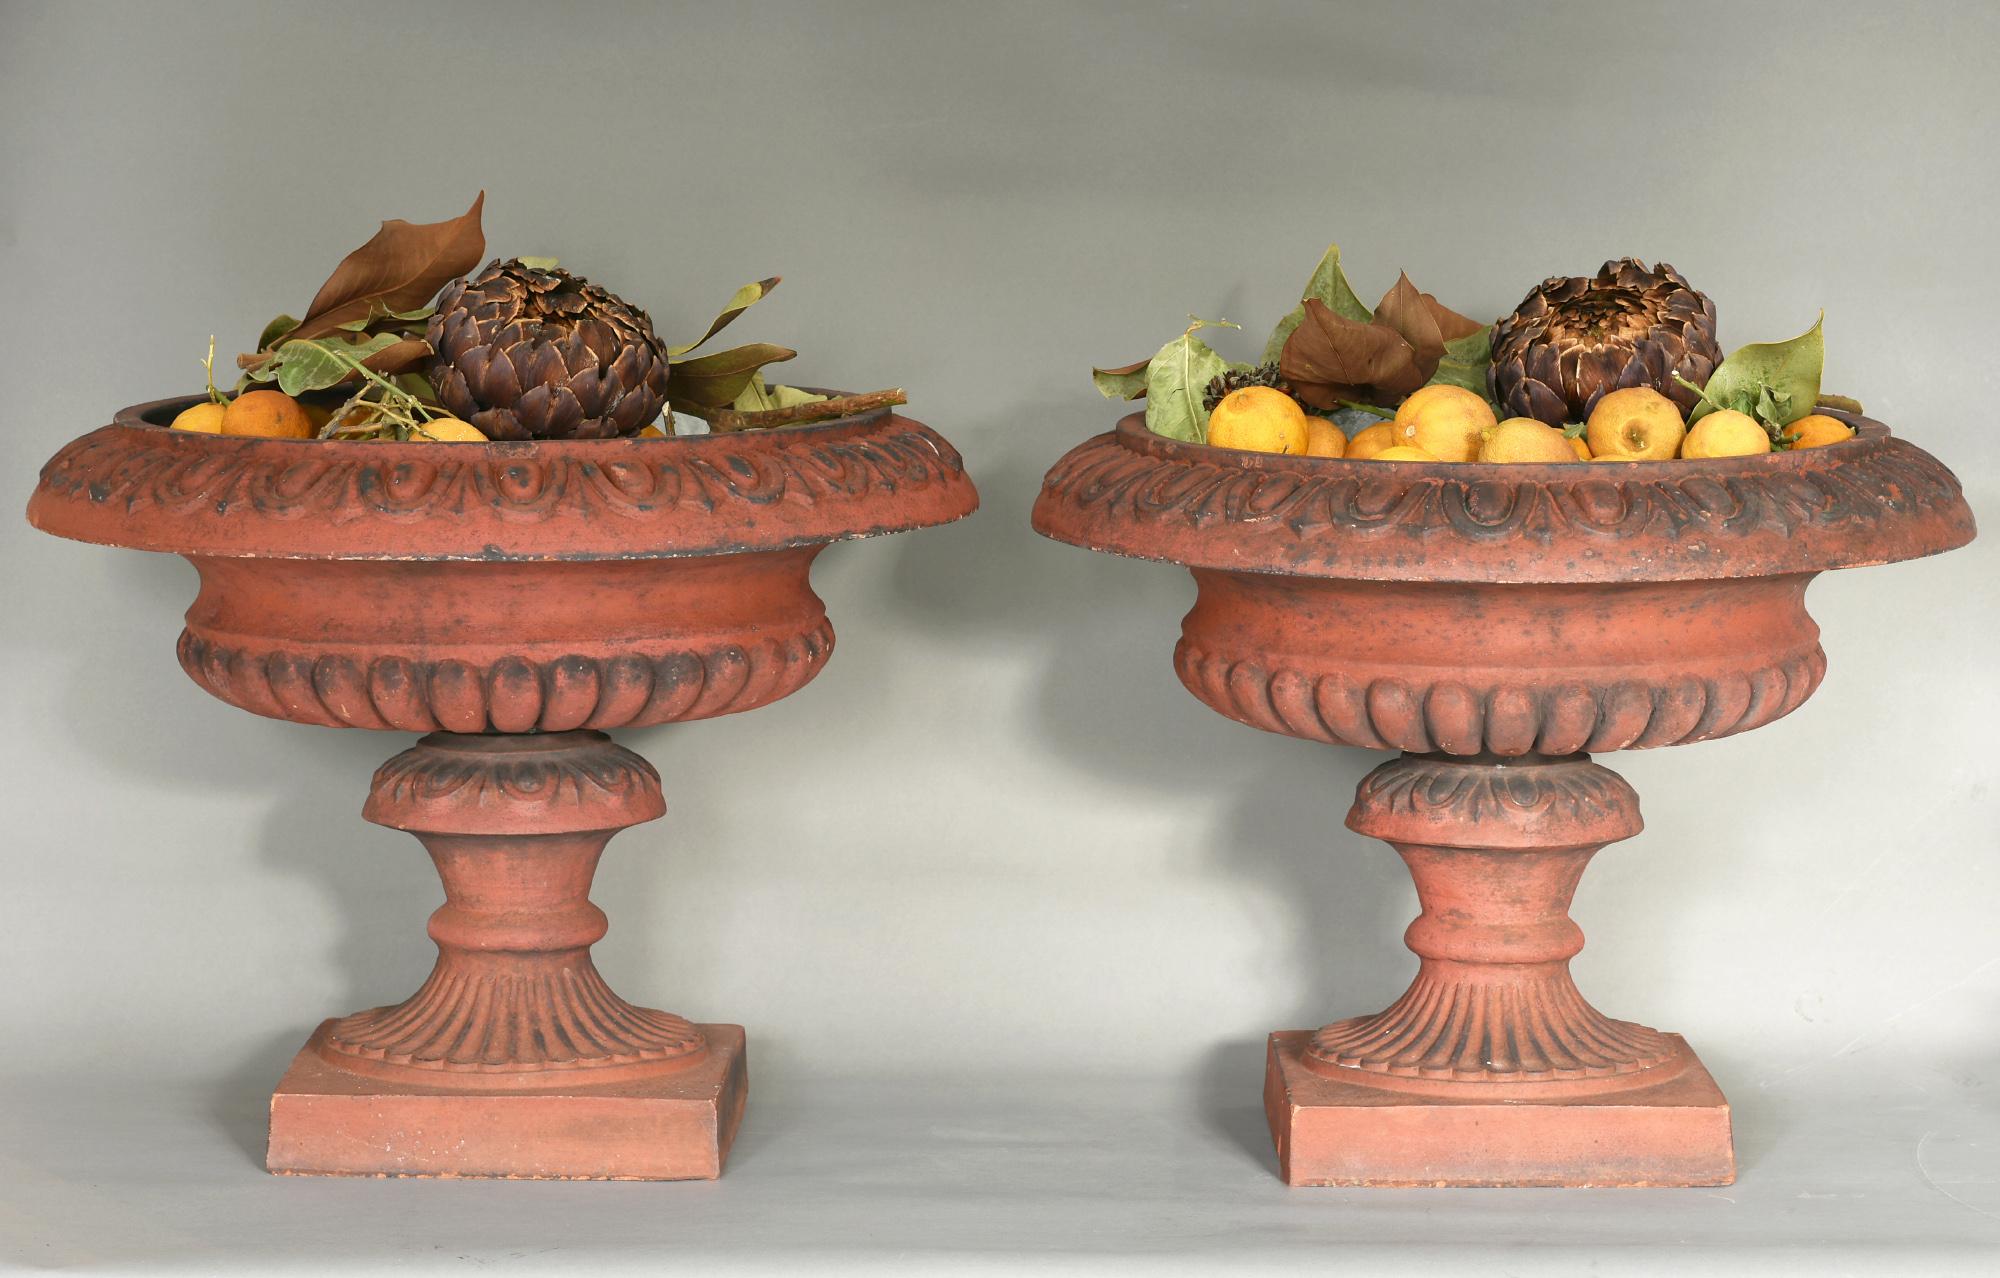 A particularly beautiful pair of terracotta vases made in England, circa 1900.
The pair is worked out very nice and consists out of two parts, as you can see in the pictures. They are two really decorative objects in a garden, especially with